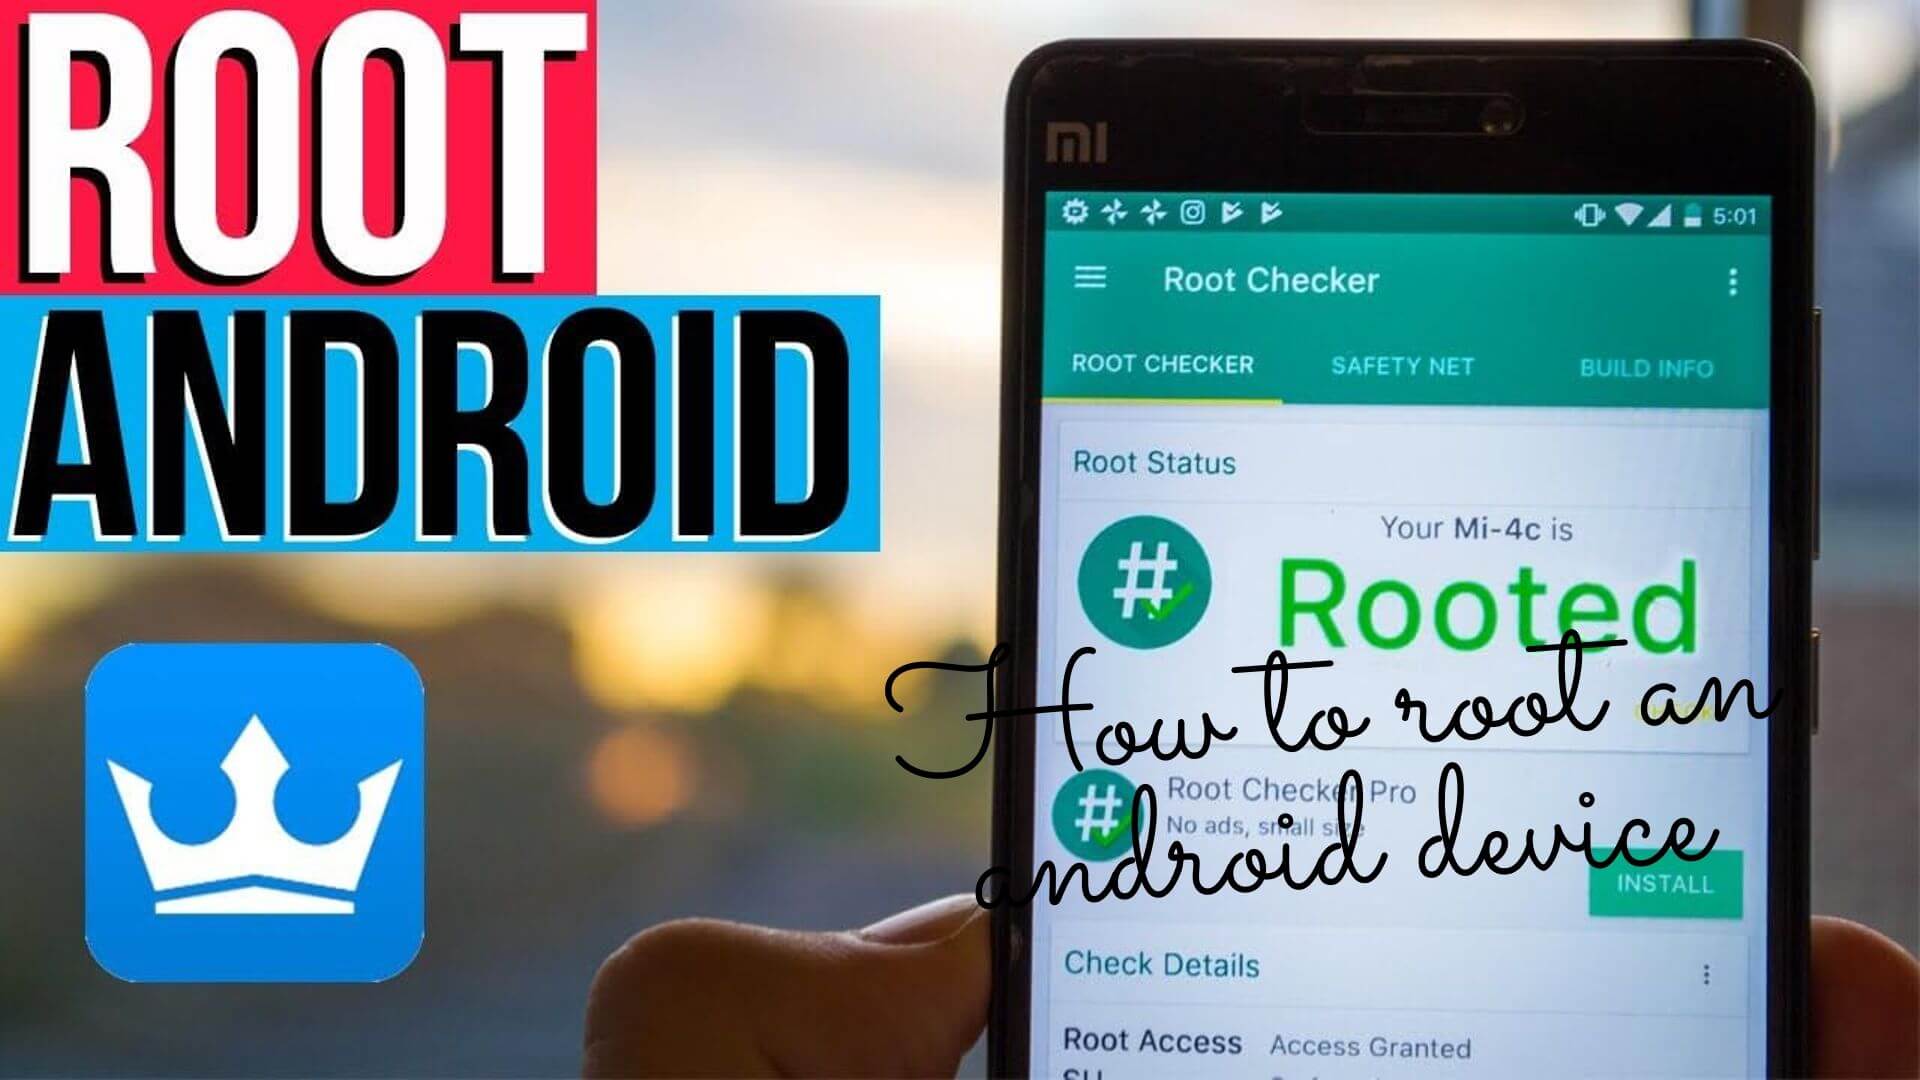 How to root an android device?